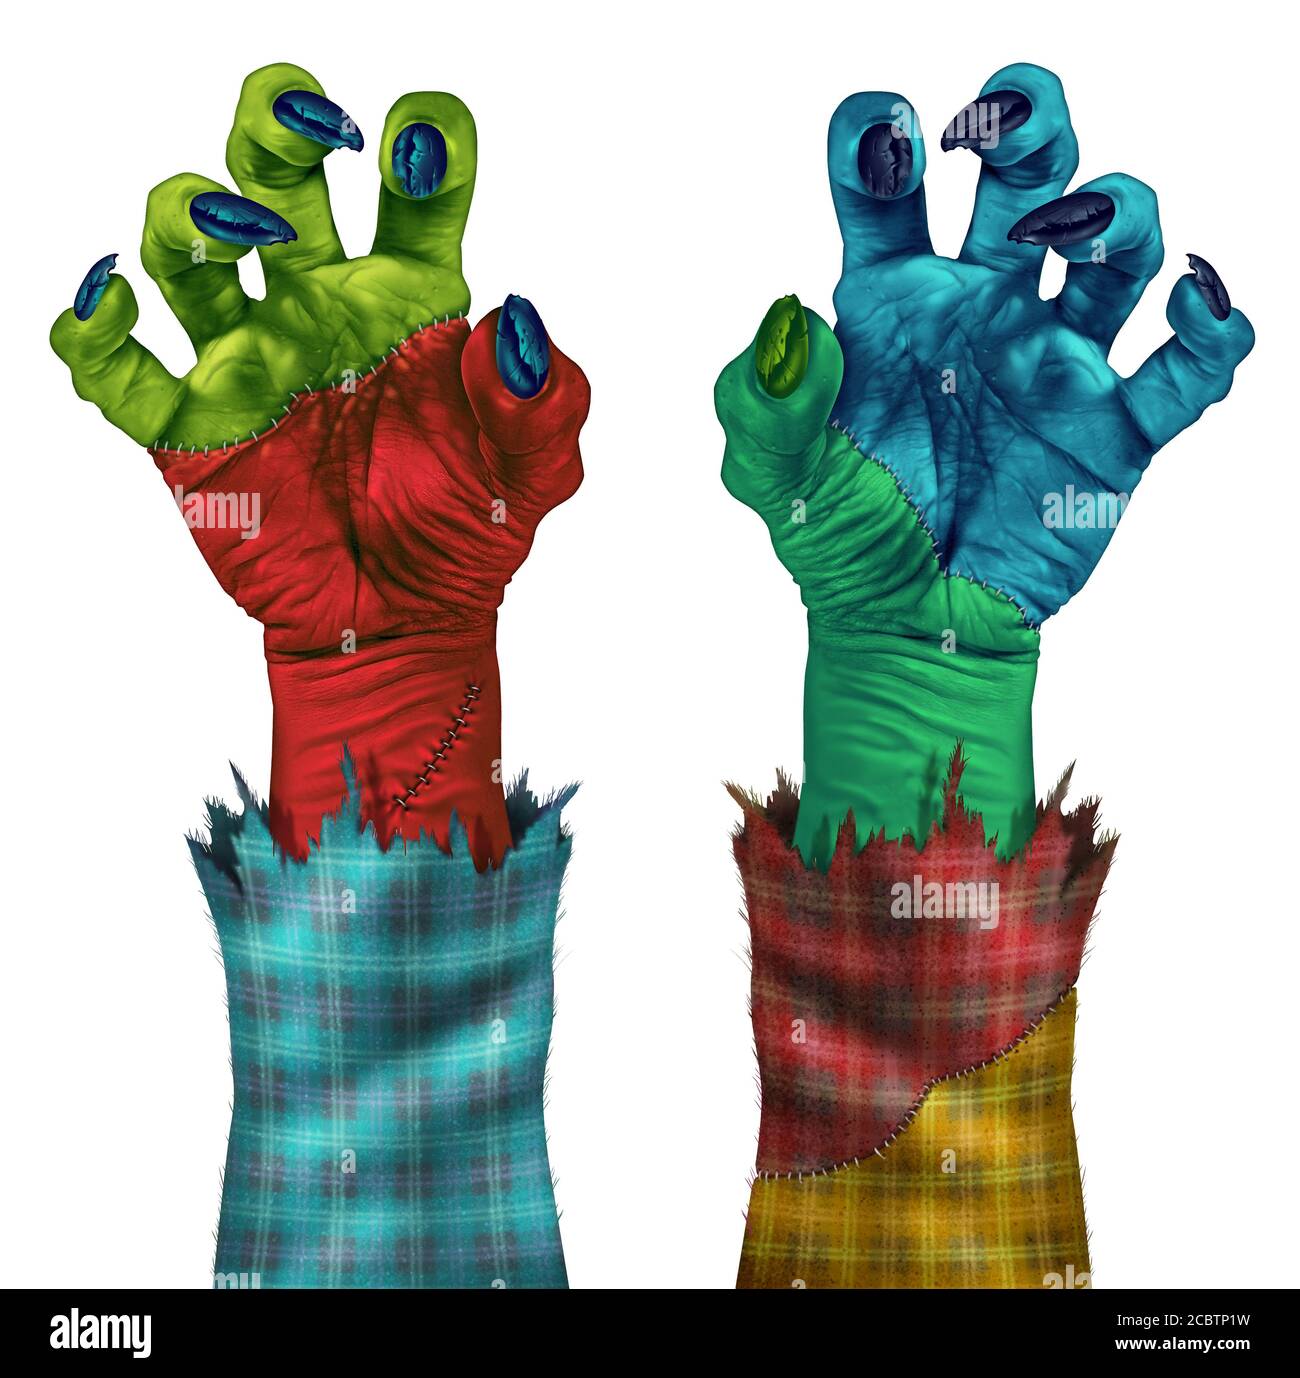 Zombie creepy hands reaching to grab as a human like green monster hand with sharp nails and stitches  representing halloween creep. Stock Photo